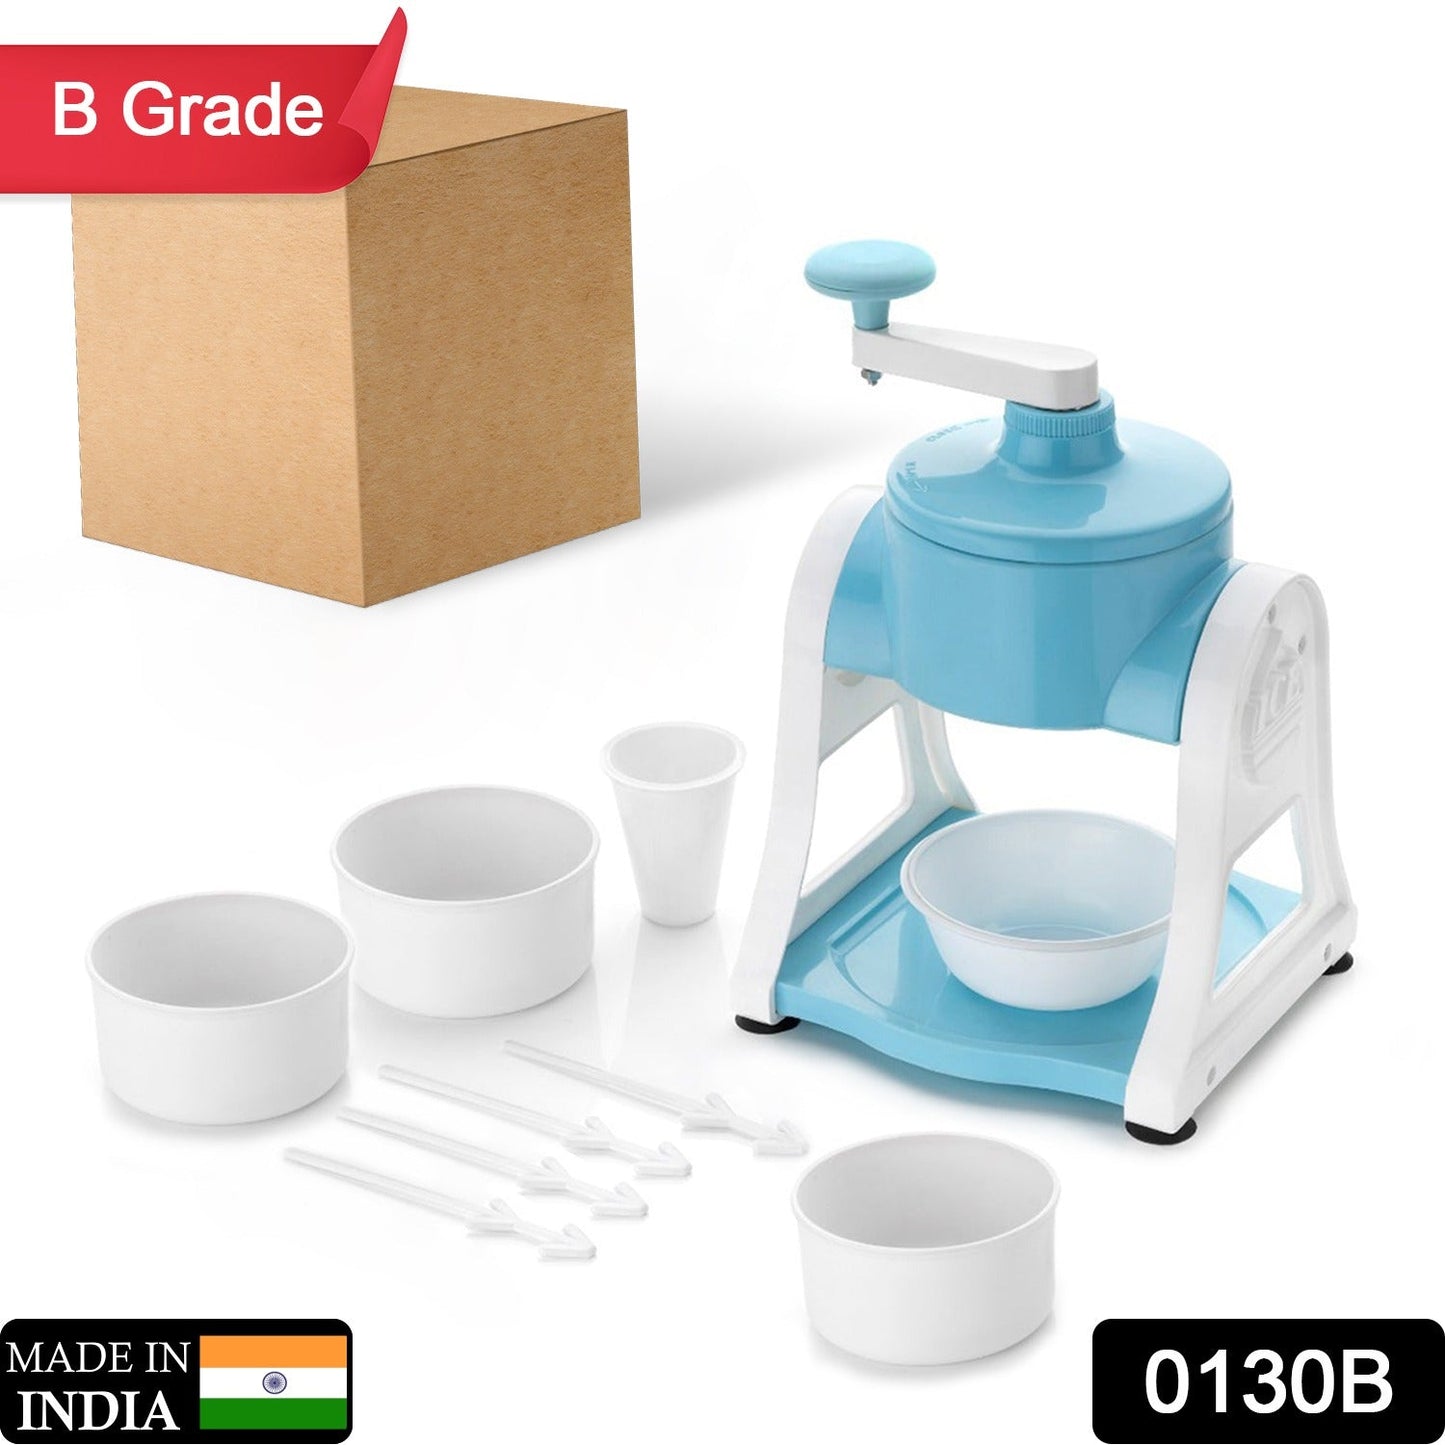 0130B  BLUE GOLA MAKER USED FOR MAKING GOLA’S IN SUMMERS AT VARIOUS KINDS OF PLACES AND ALL ( B Grade) DeoDap